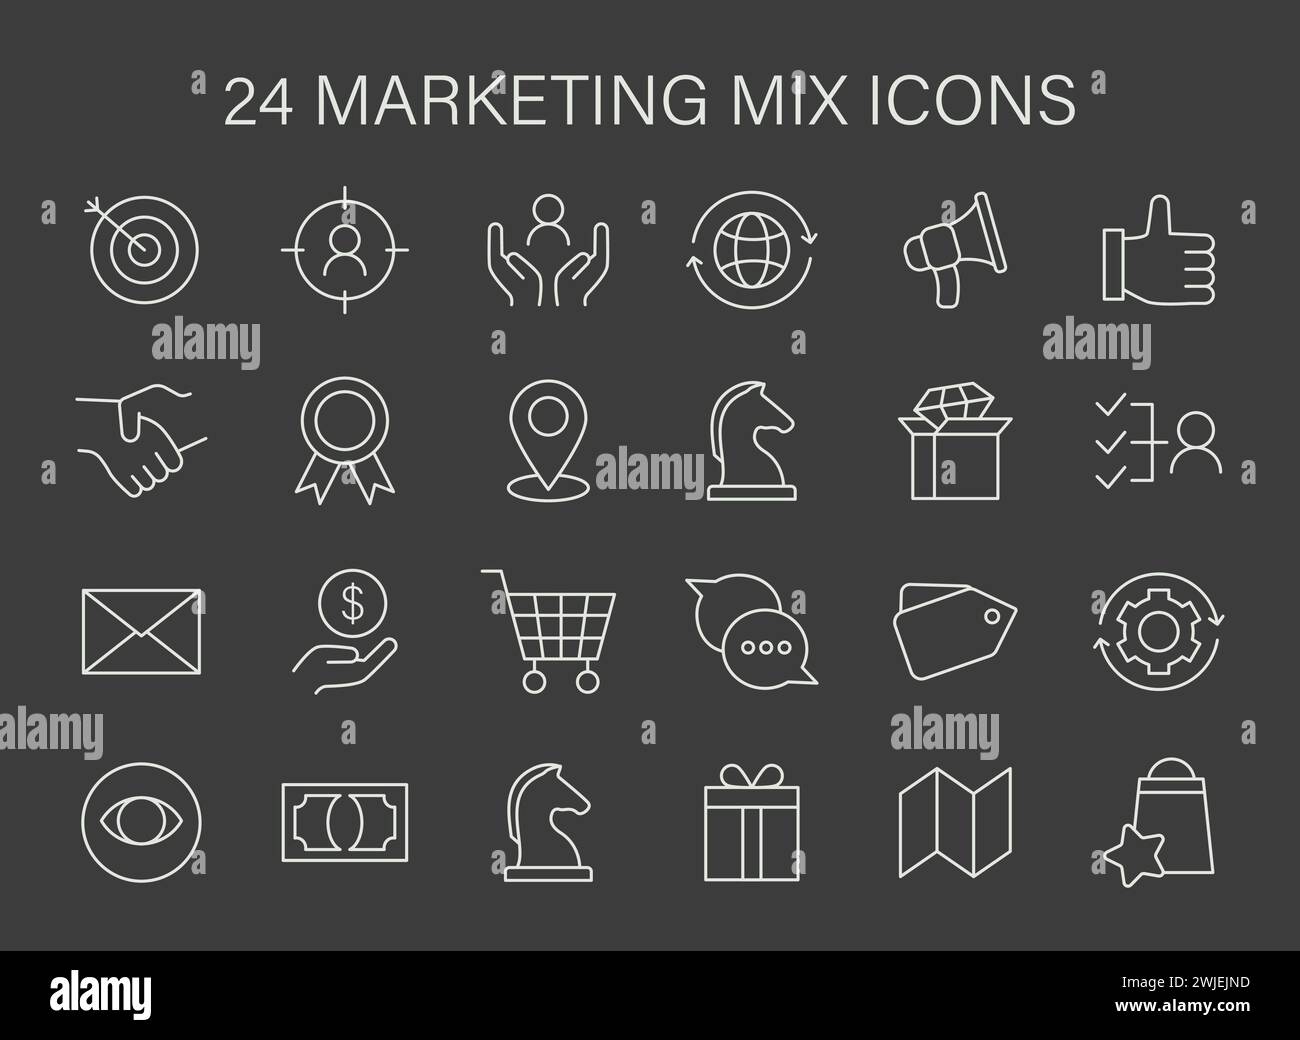 Marketing Mix icon set. Symbols represent strategic components like targeting, global reach, and customer service. Essentials for market planning. Flat vector icons. Stock Vector